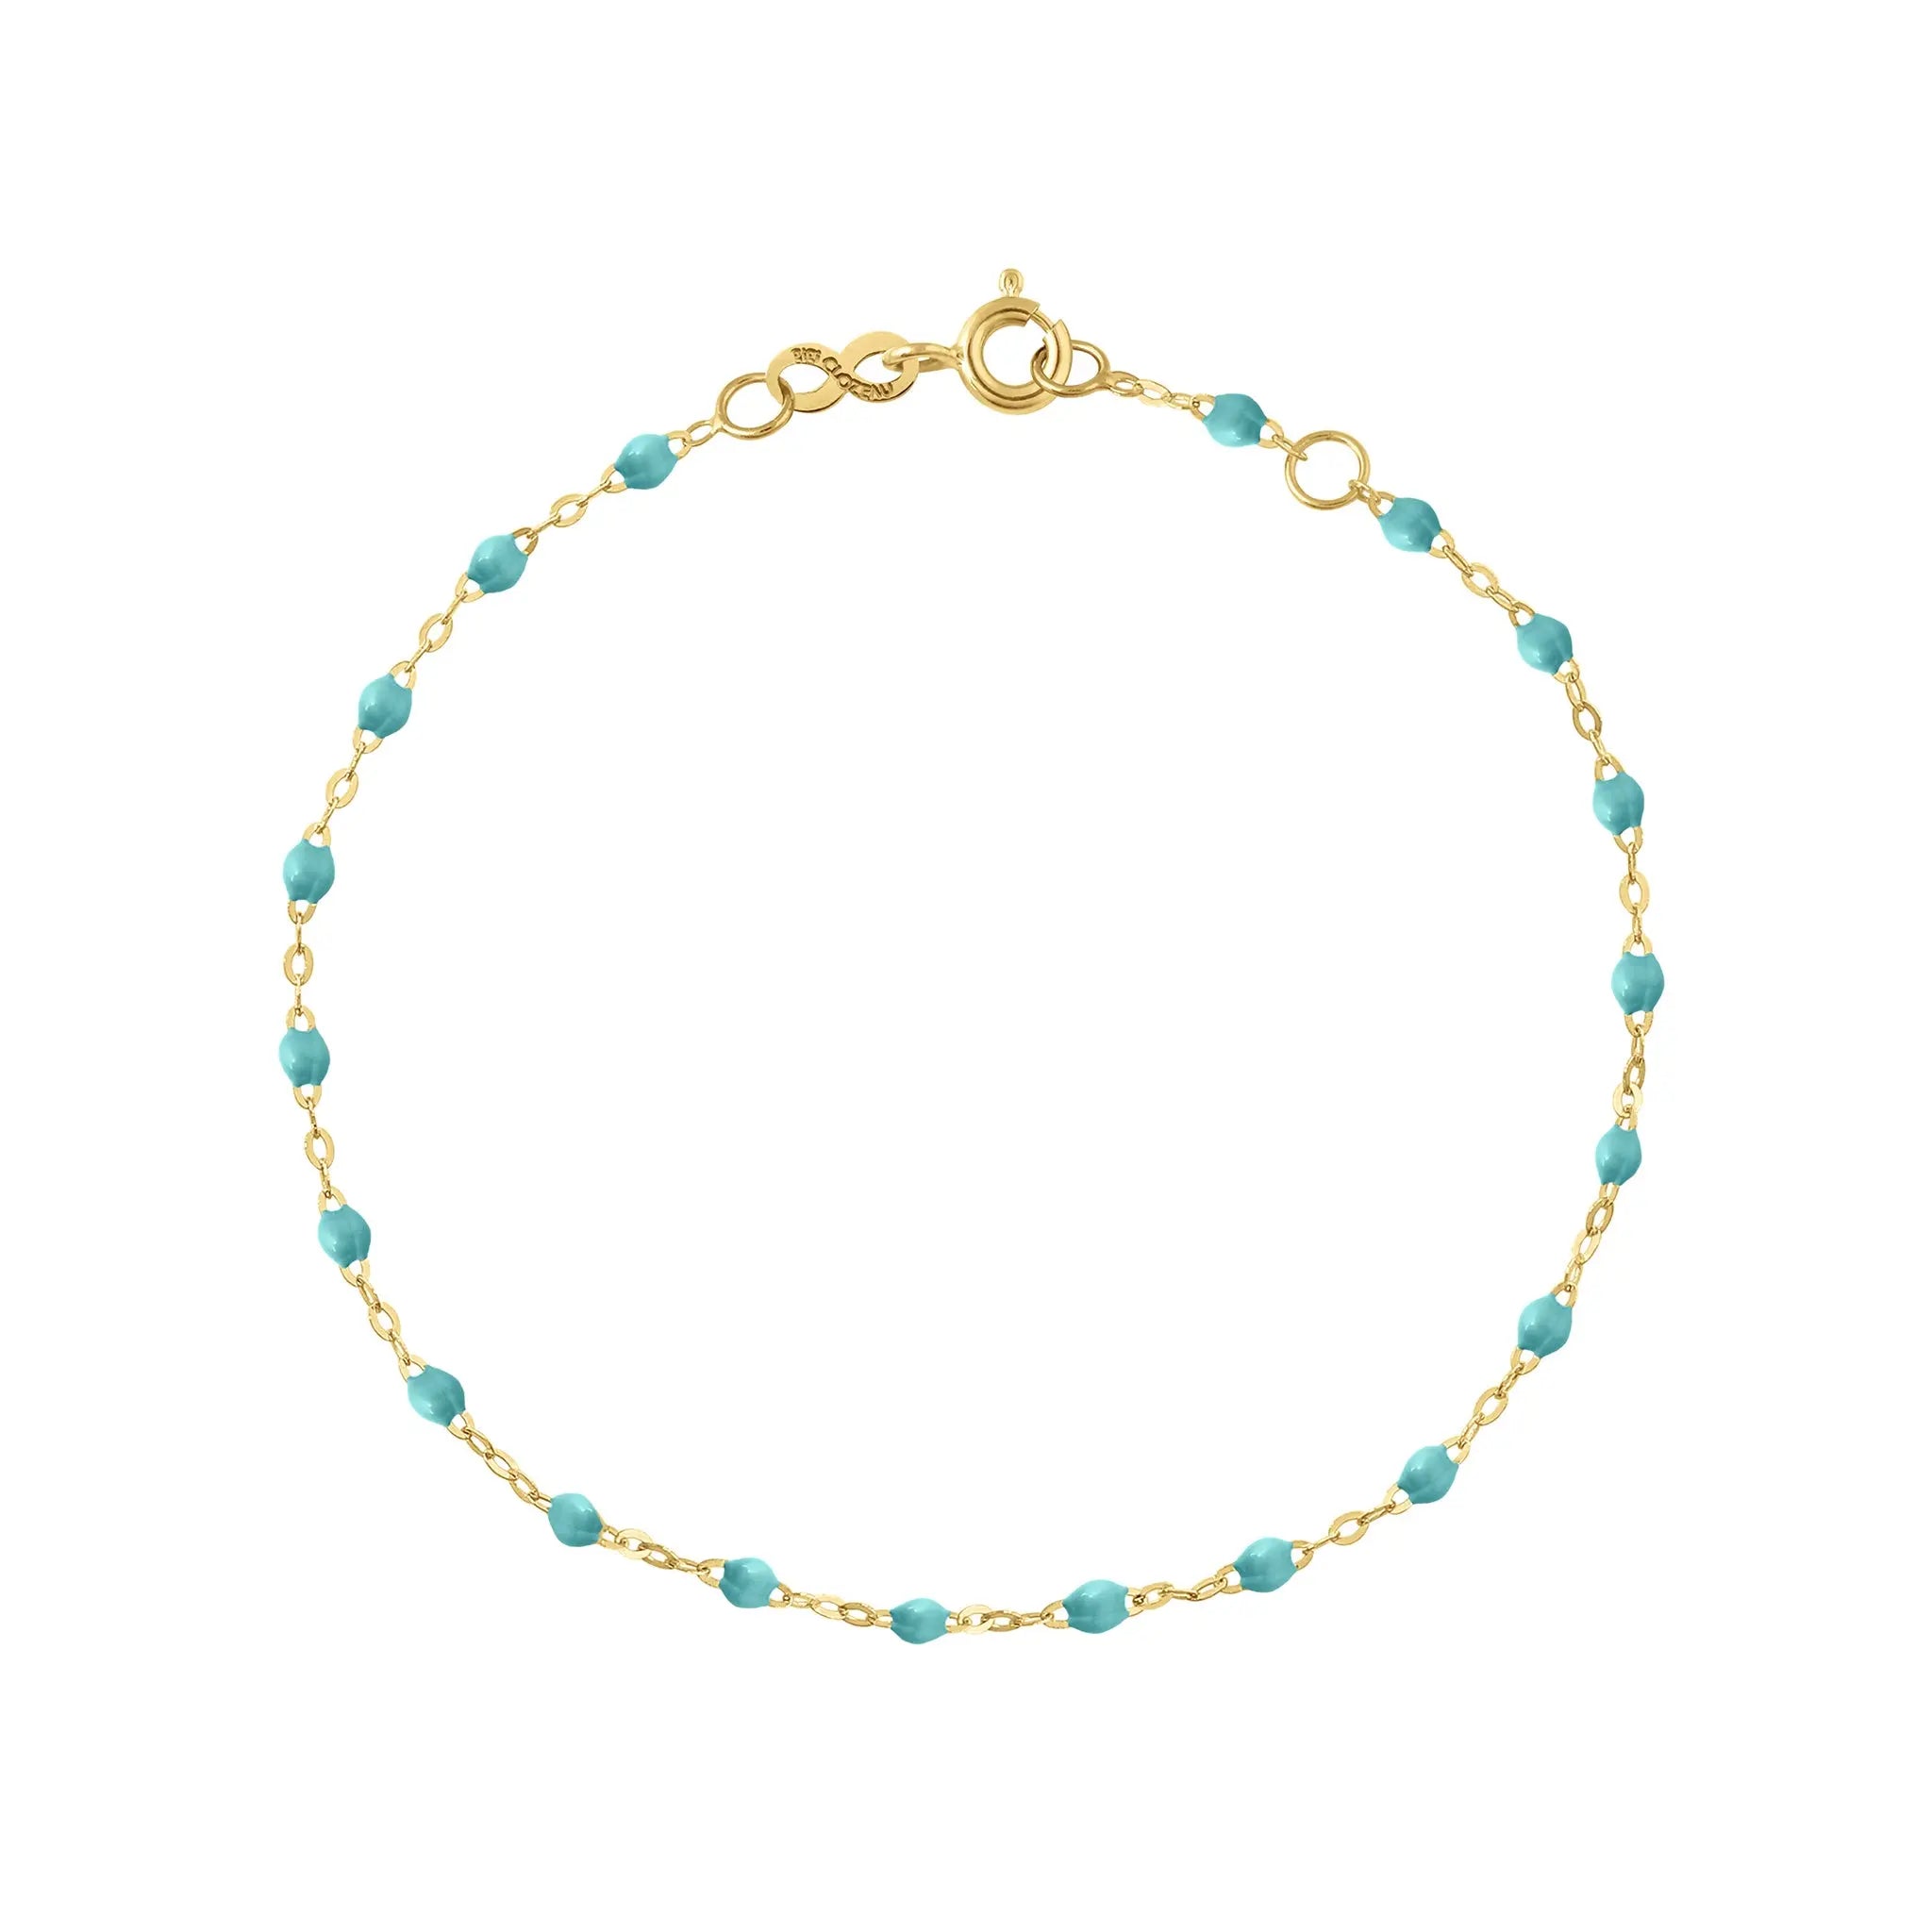 The Classic Gigi bracelet by gigi CLOZEAU features 18K Yellow Gold, and unique Turquoise Green jewels for a simple, everyday look.   Each jewel is unique, artisanally made in their family-owned workshop. 18K yellow gold and resin. The bracelet measures 6.7 inches with adjustable clasp at 6.3 inches.